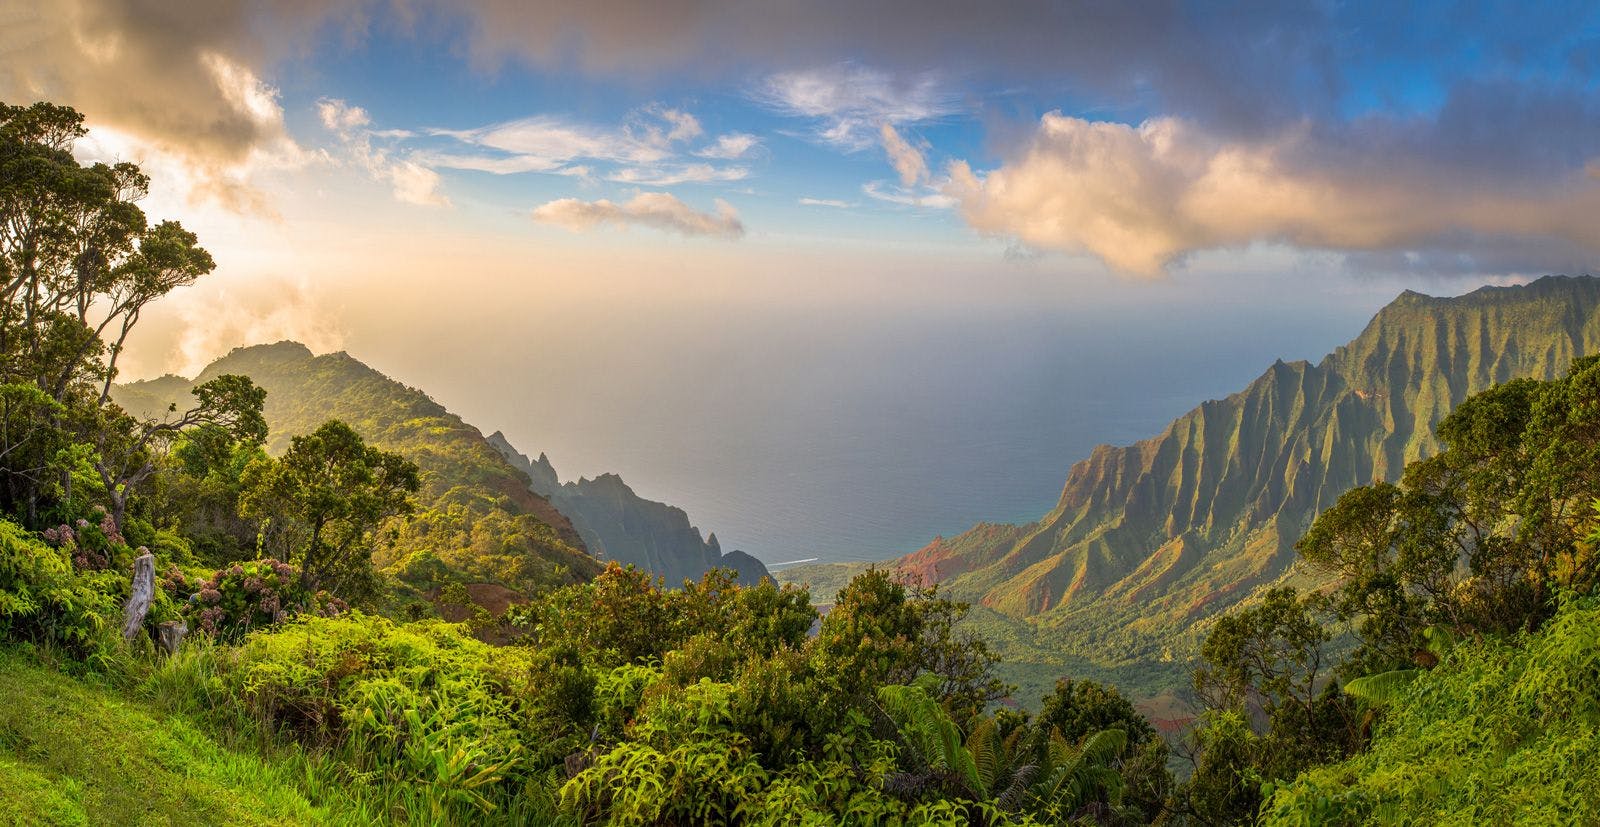 Hawaii island view of cliffs, forests and ocean